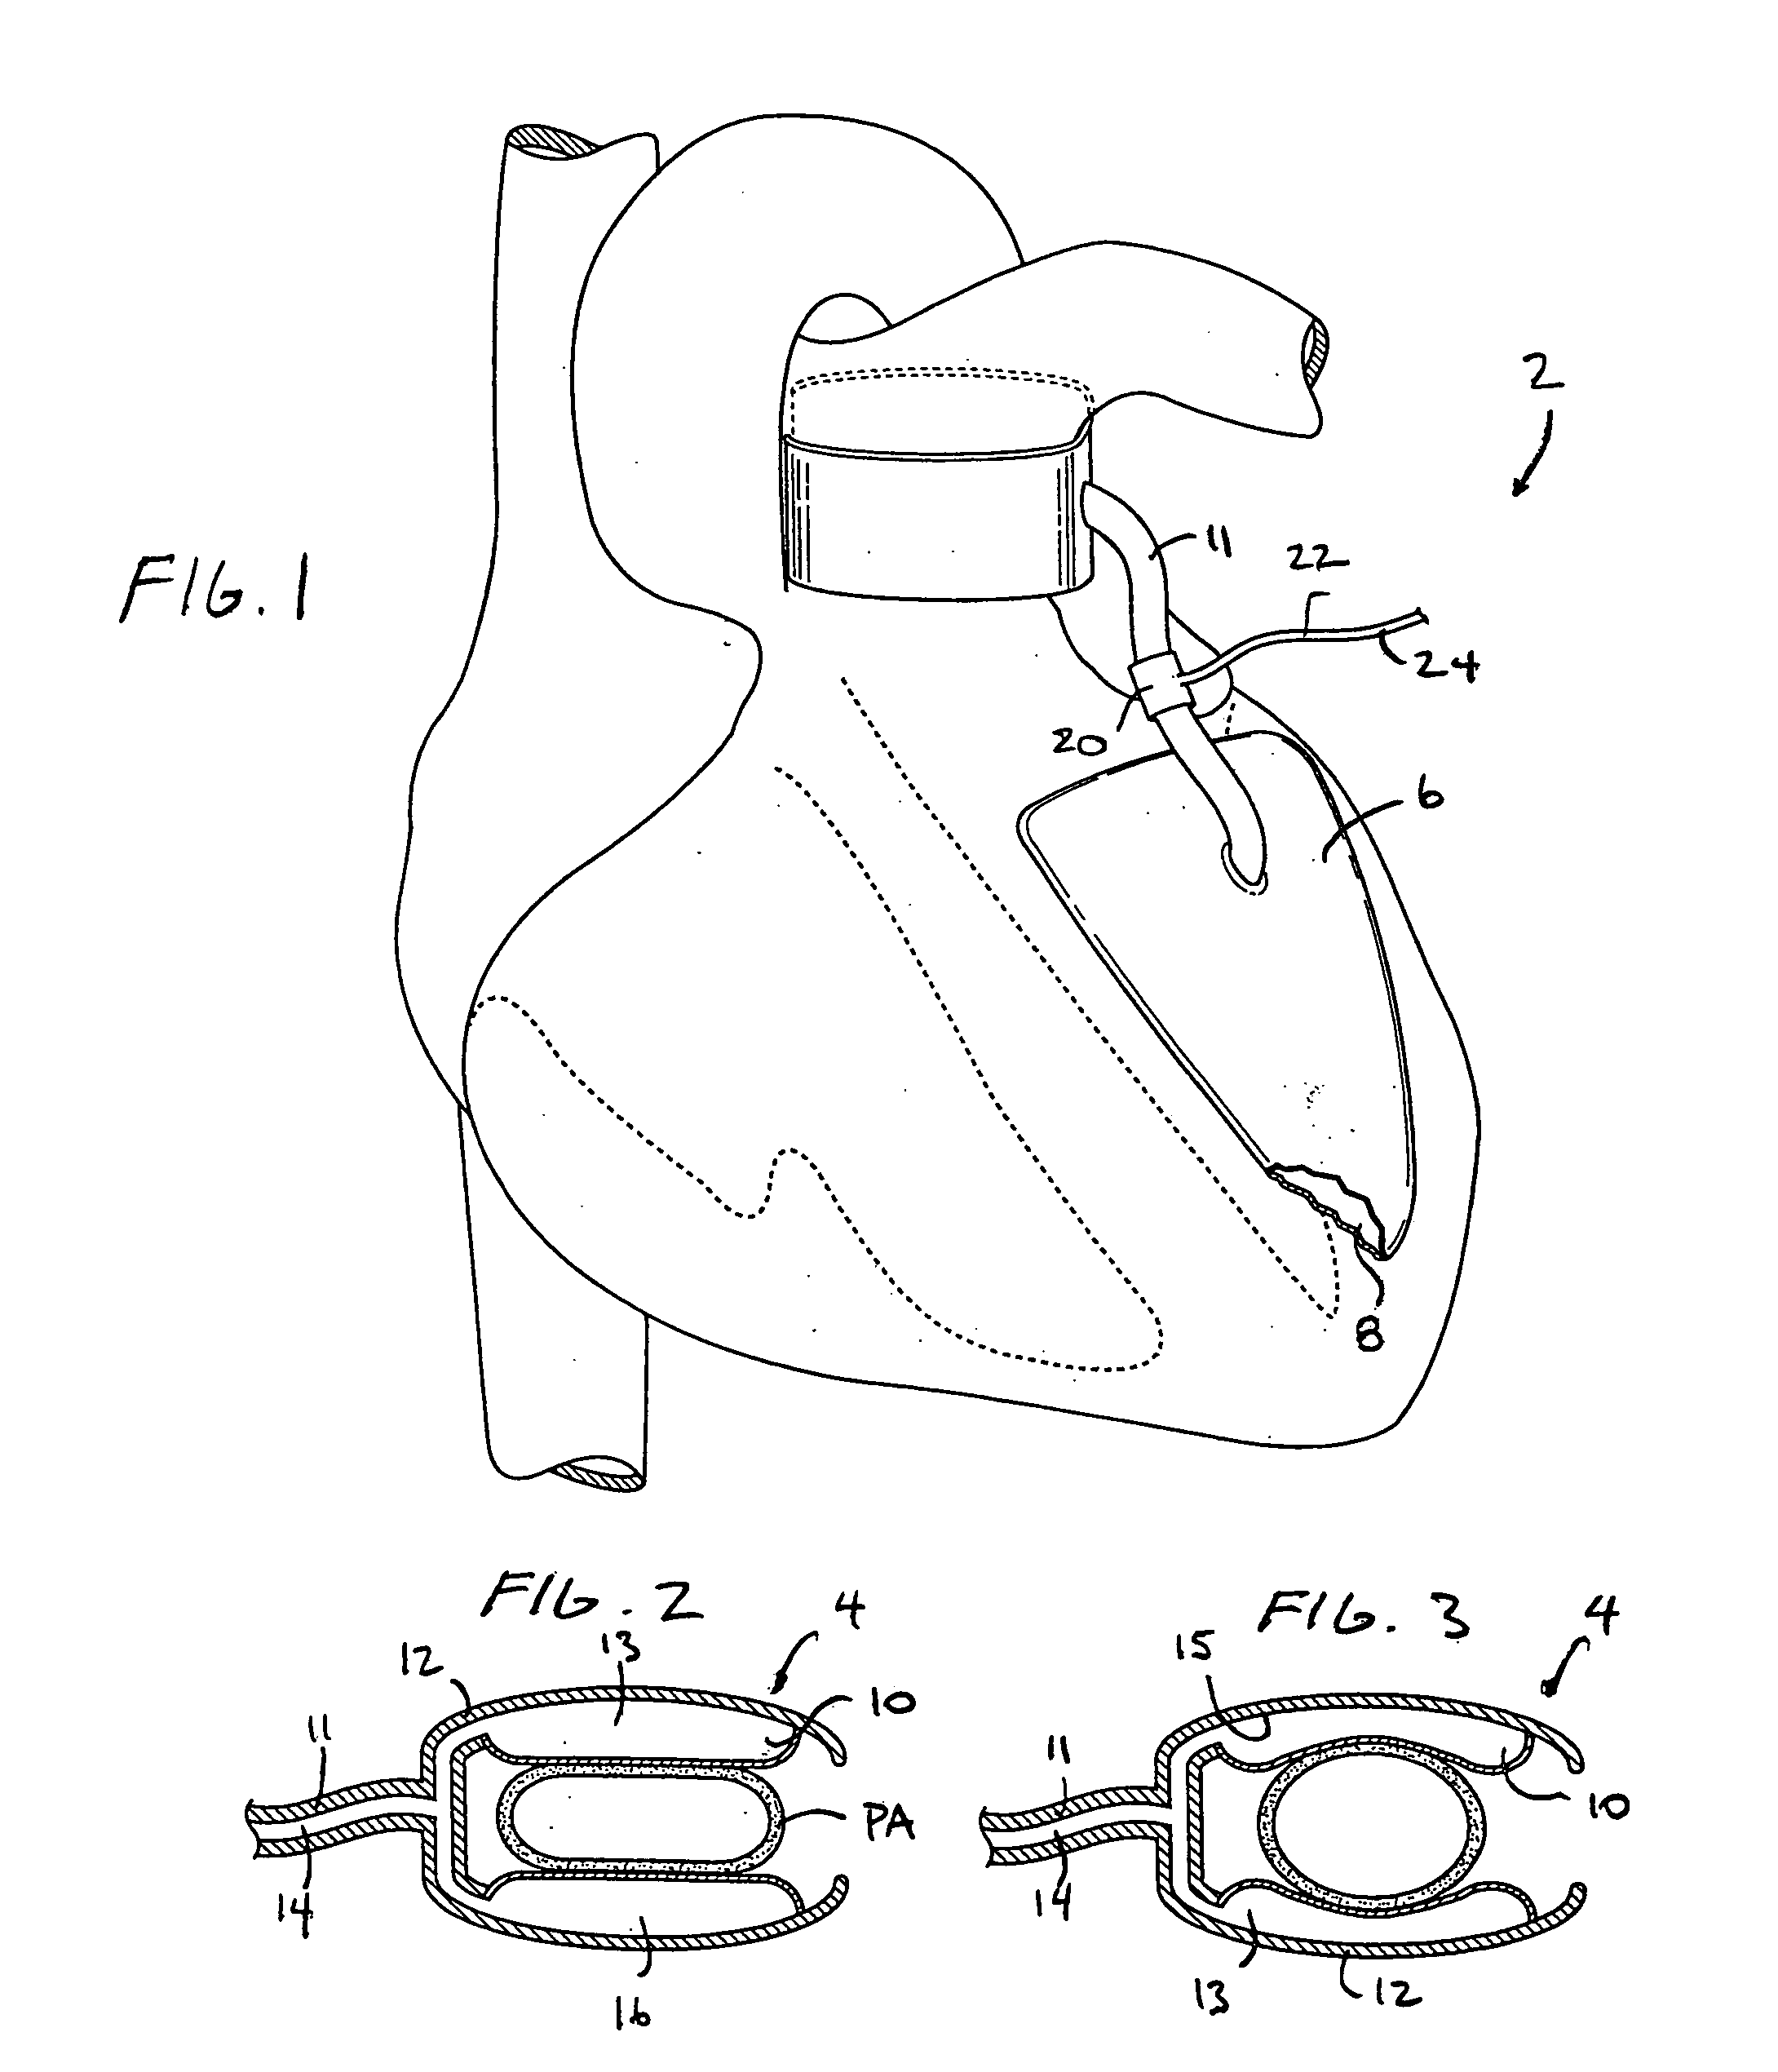 Devices and methods for absorbing, transferring, and delivering heart energy